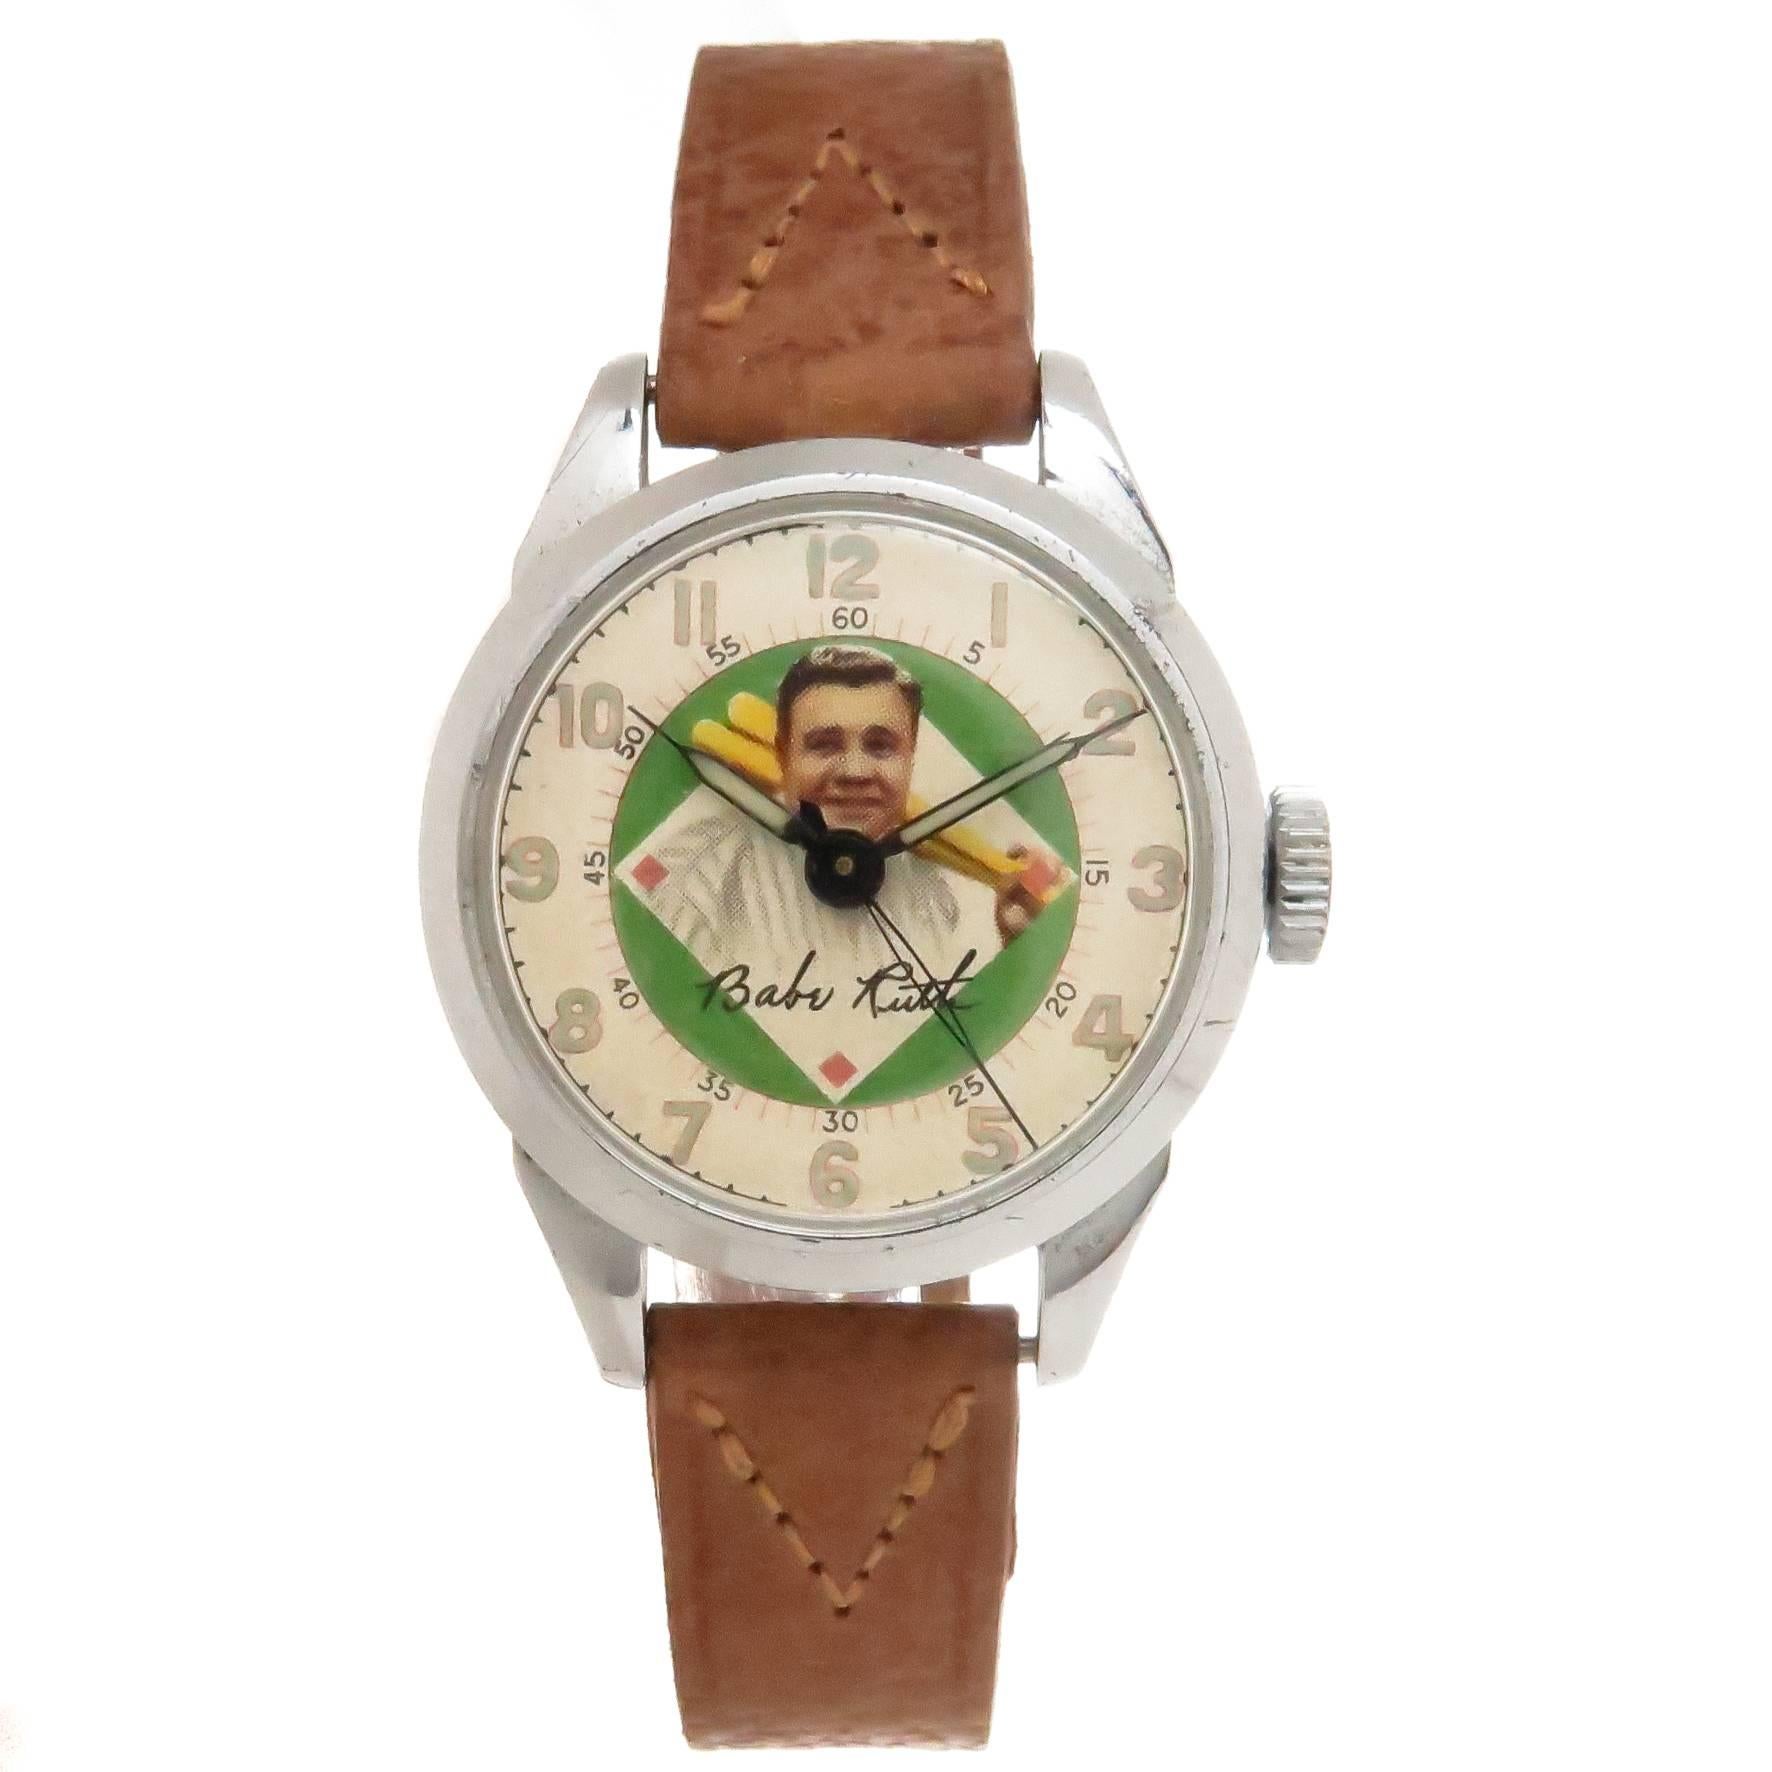 Exacta Time Corp Stainless Steel Babe Ruth Mechanical Wristwatch, circa 1948 